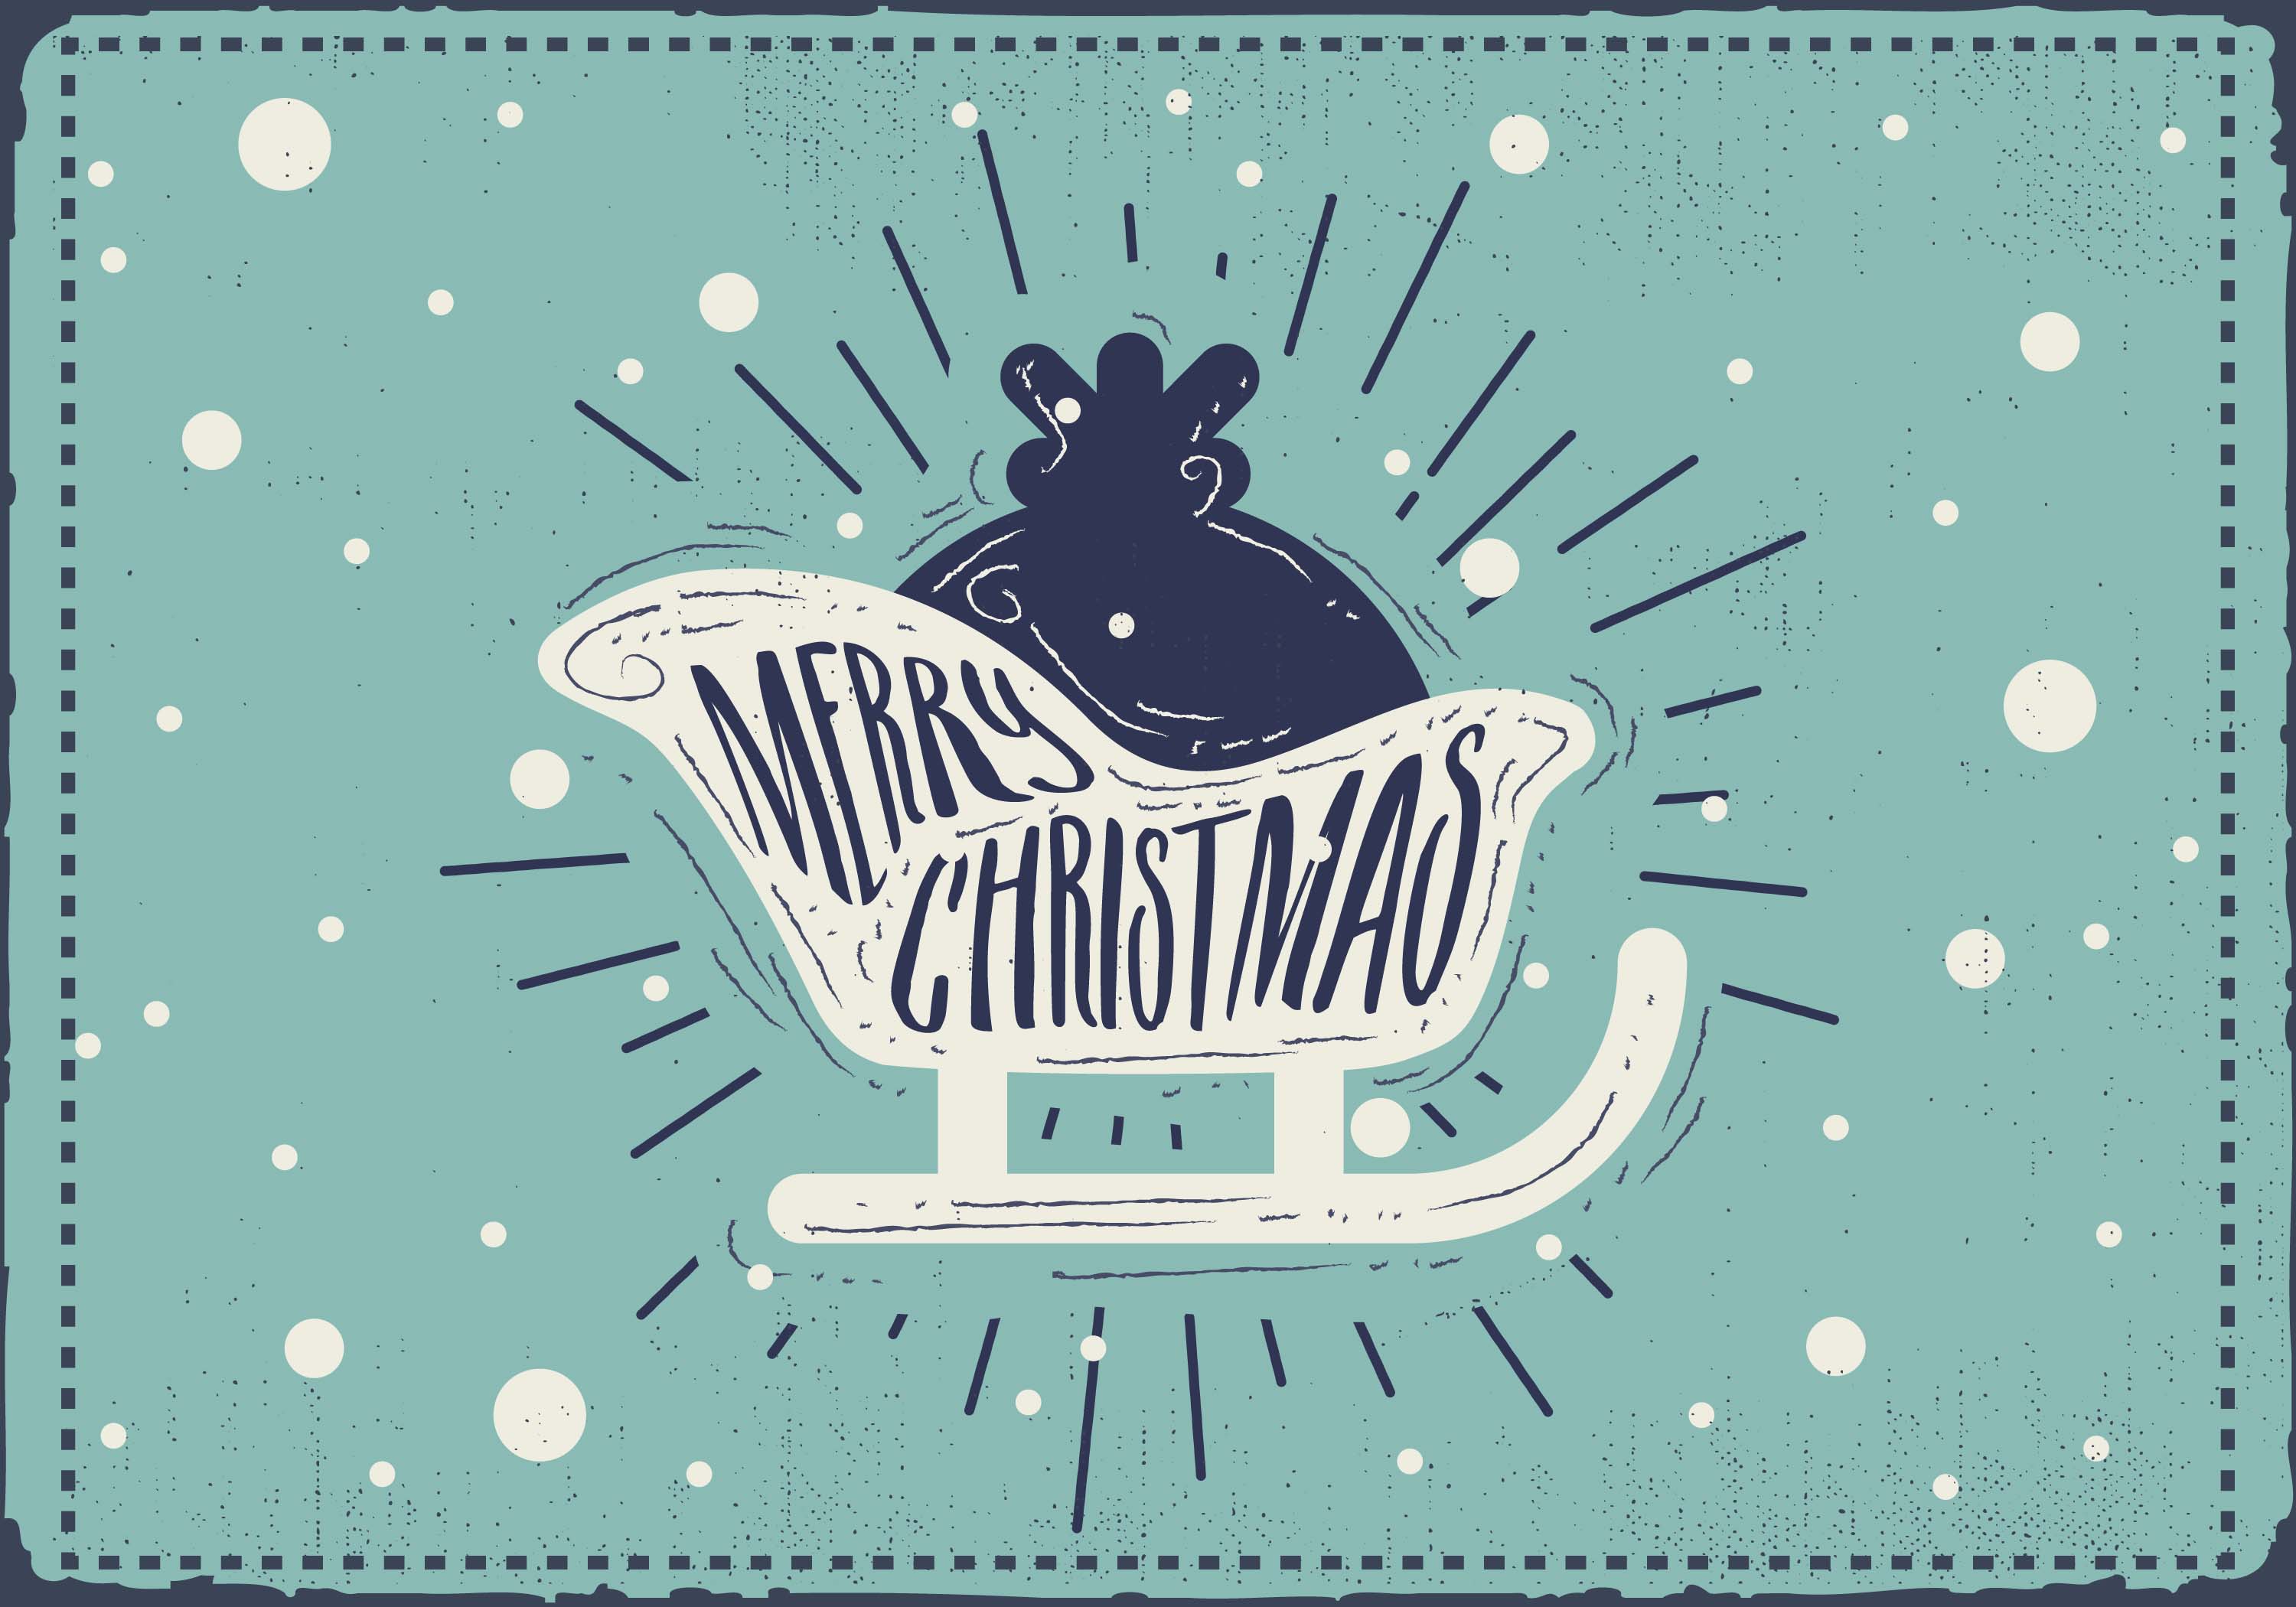 Download Free Vintage Christmas Silhouette Vector Background - Download Free Vectors, Clipart Graphics ...